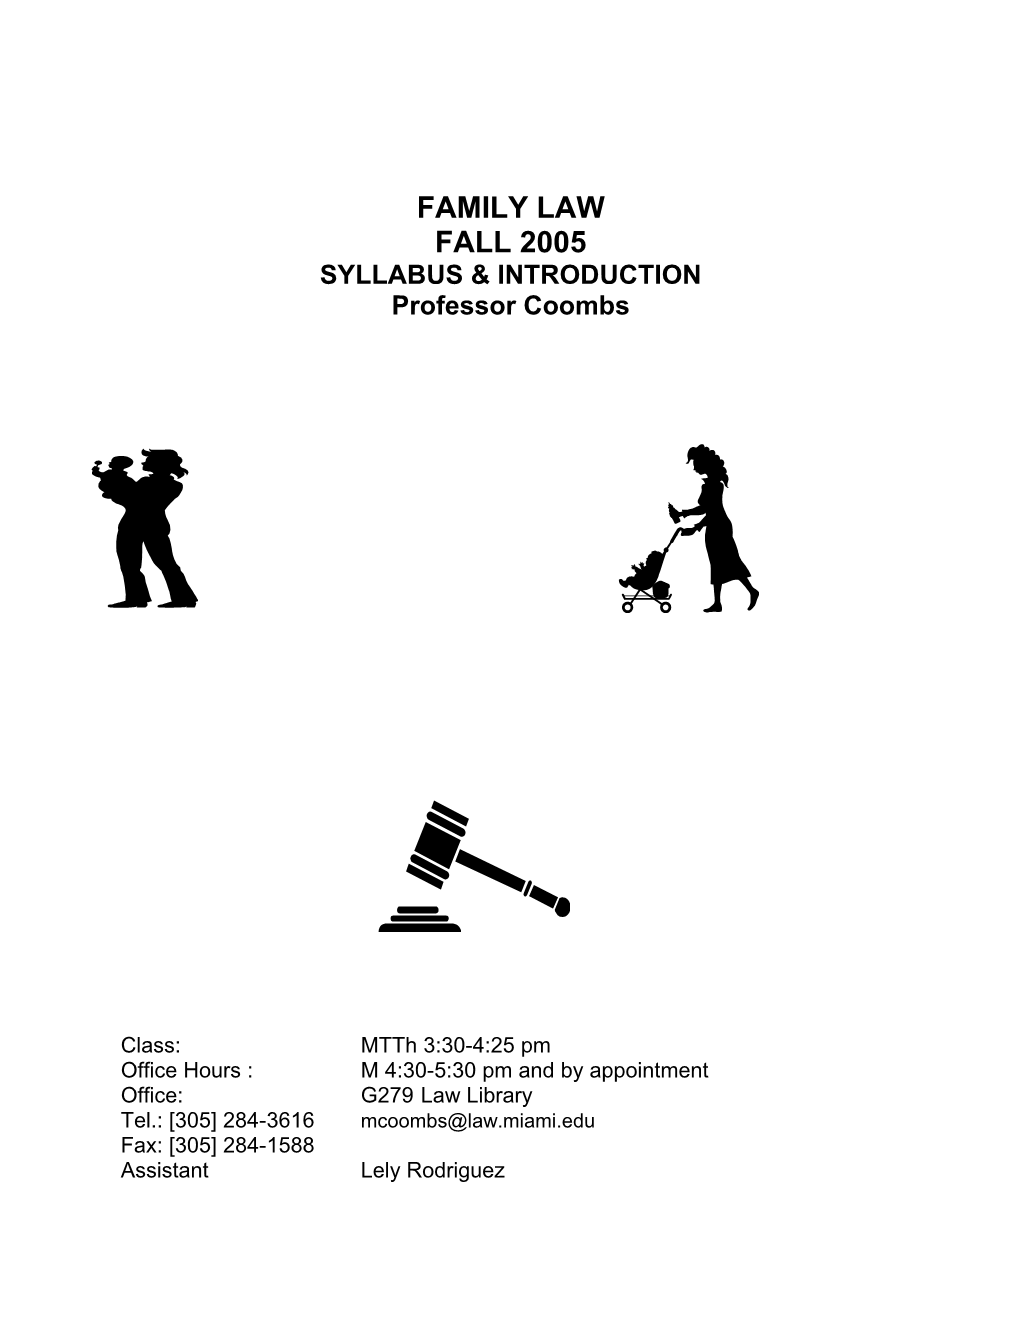 Family Law Syllabusprofessor Coombs